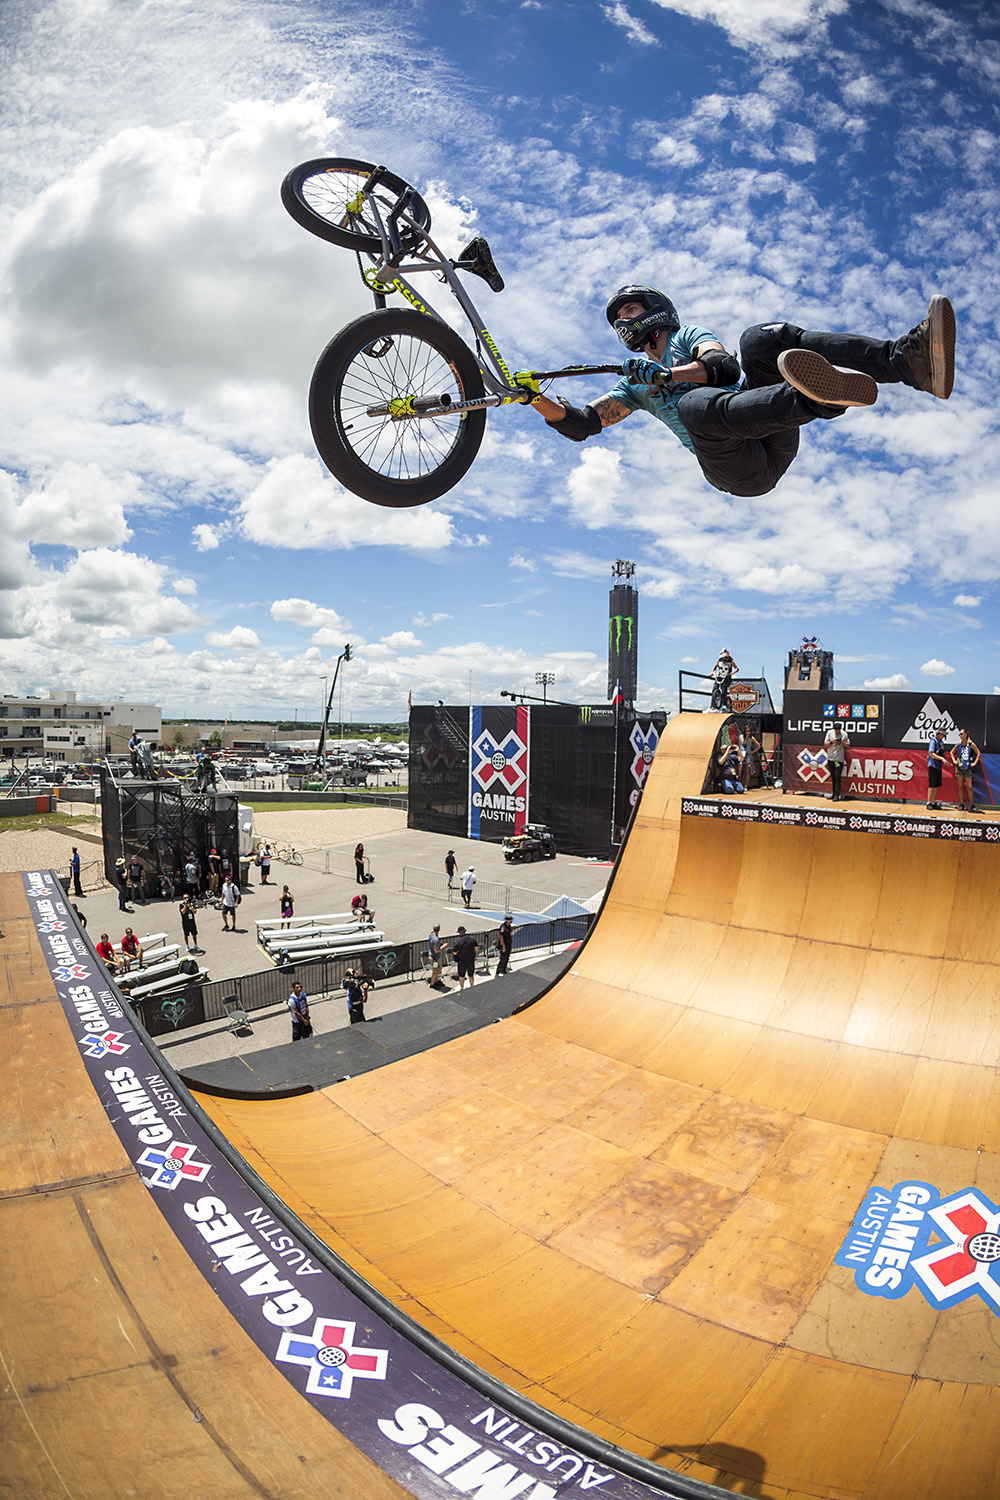 Monster Energy’s Jamie Bestwick Reclaims Gold in BMX Vert at X Games Austin 2016 and Wins his 14th Gold Medal